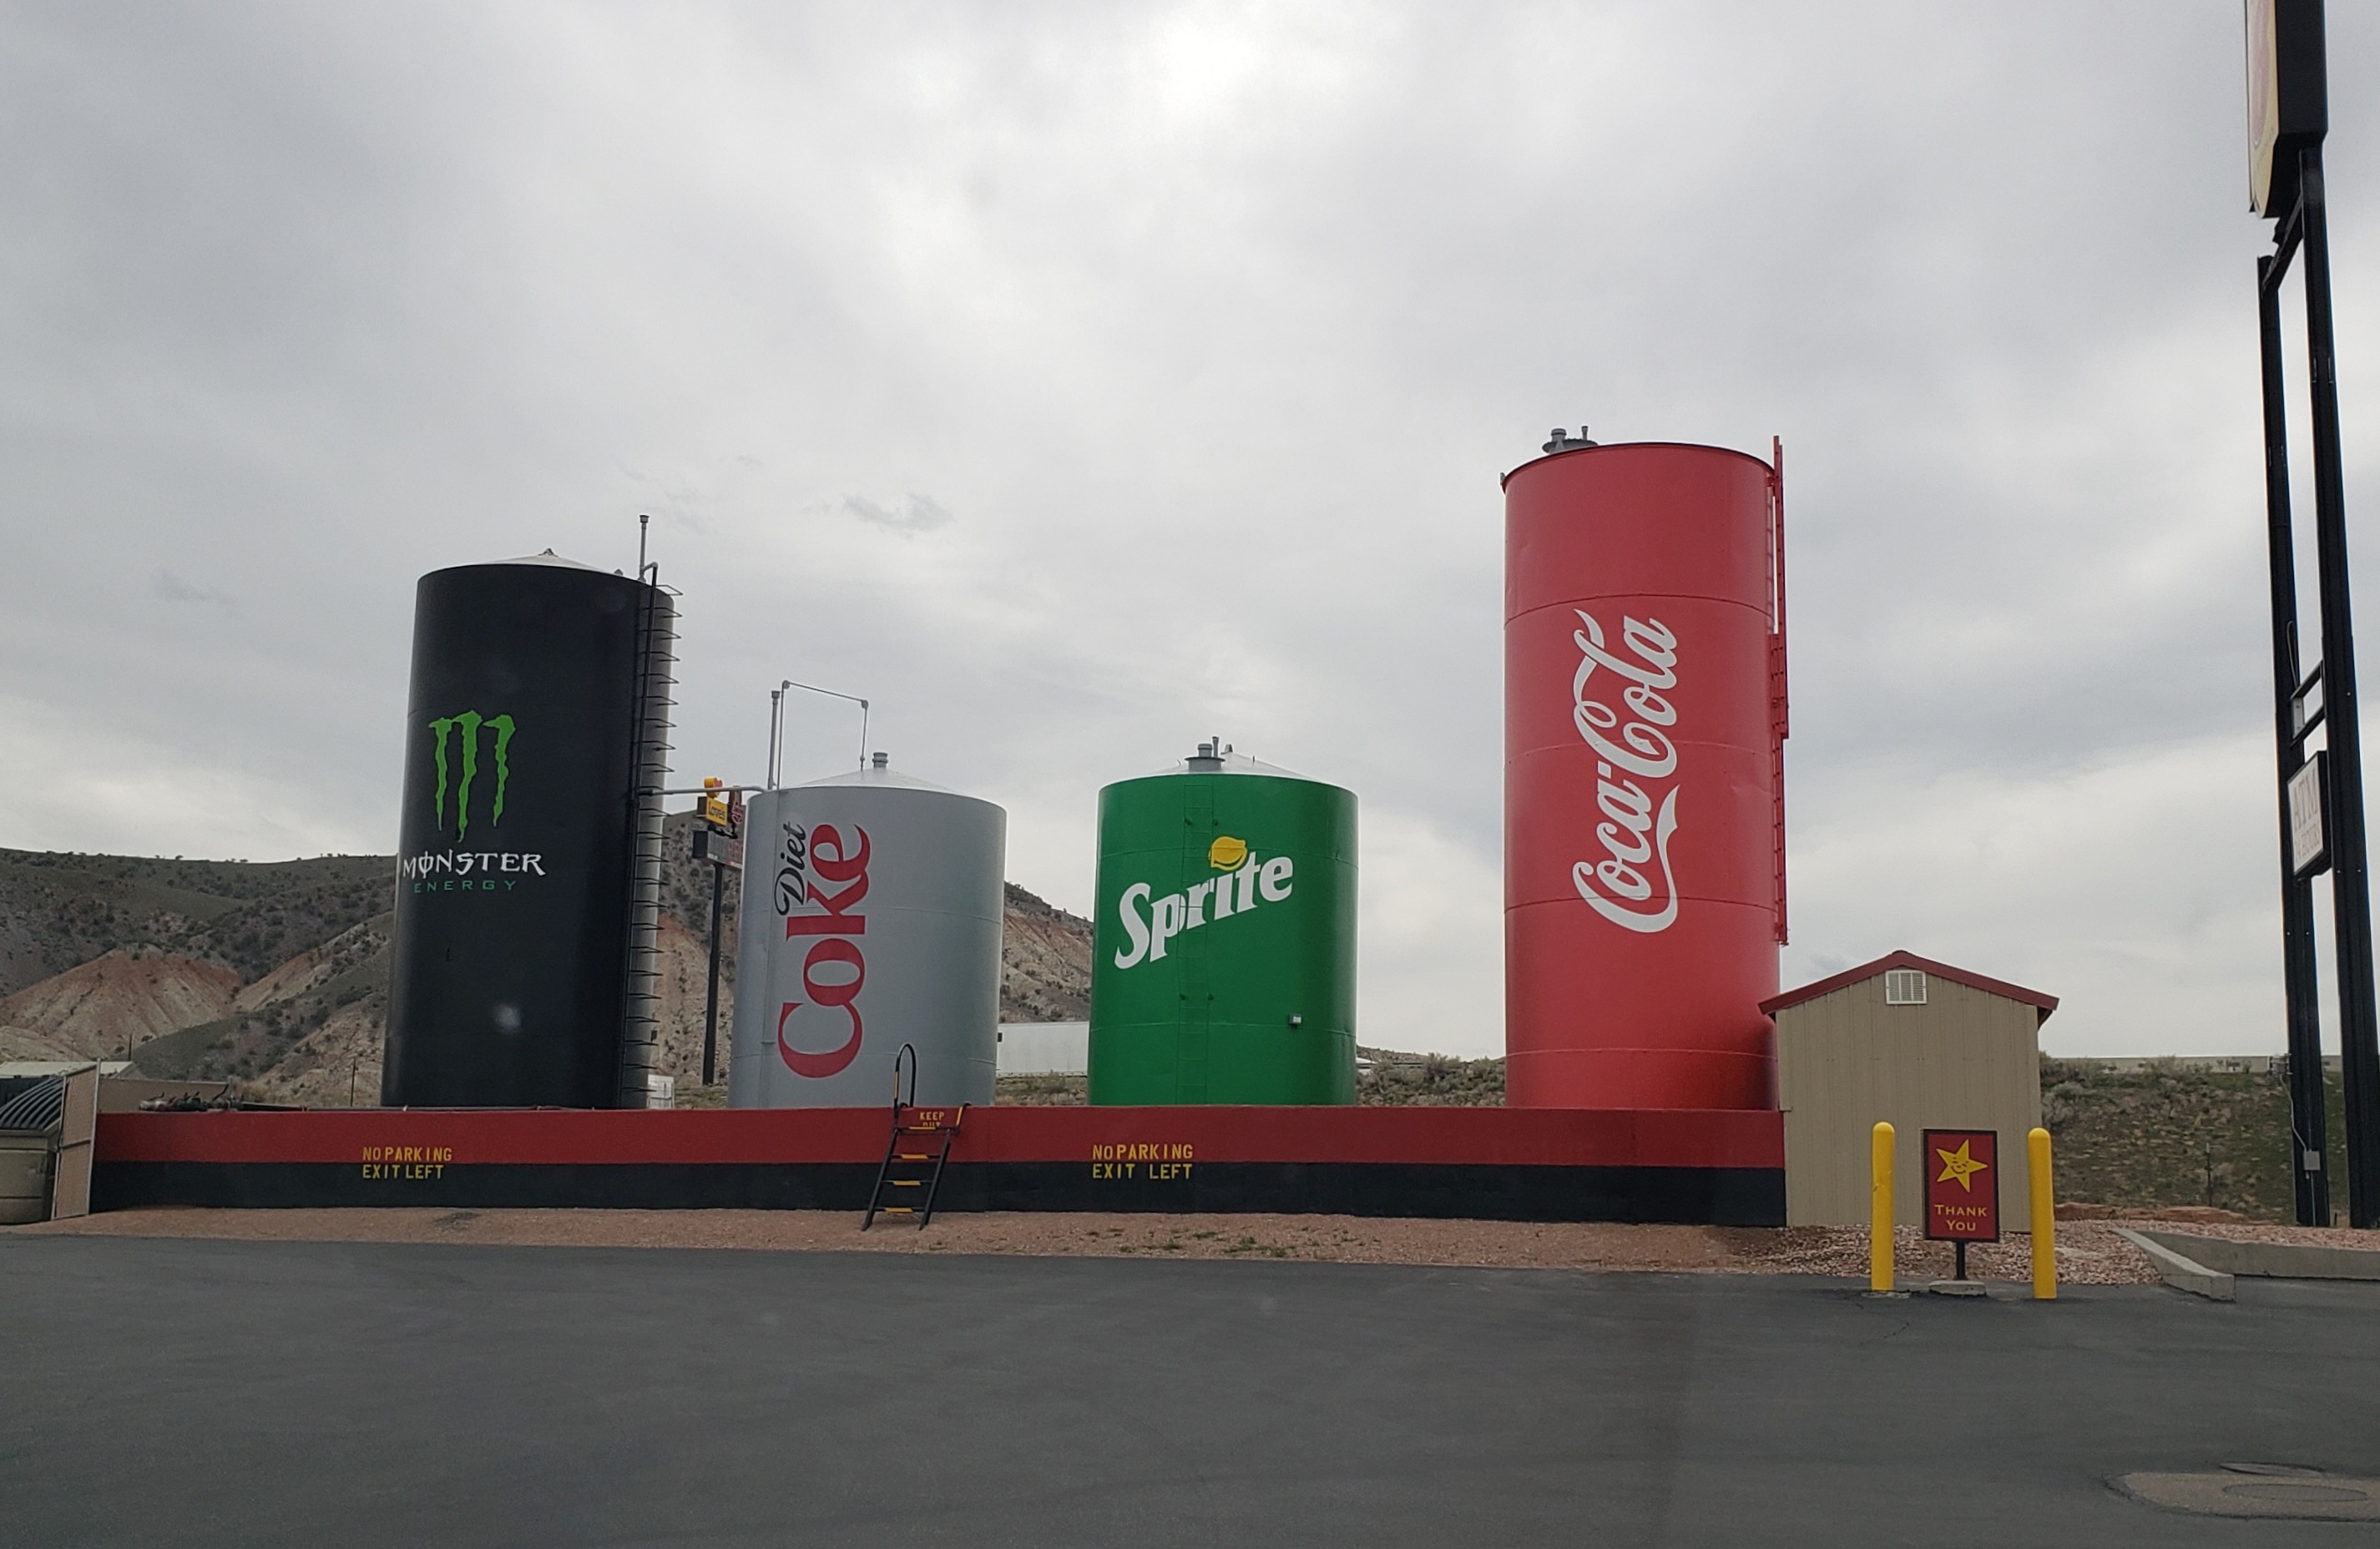 Along I70, a Coke town with decorated silos